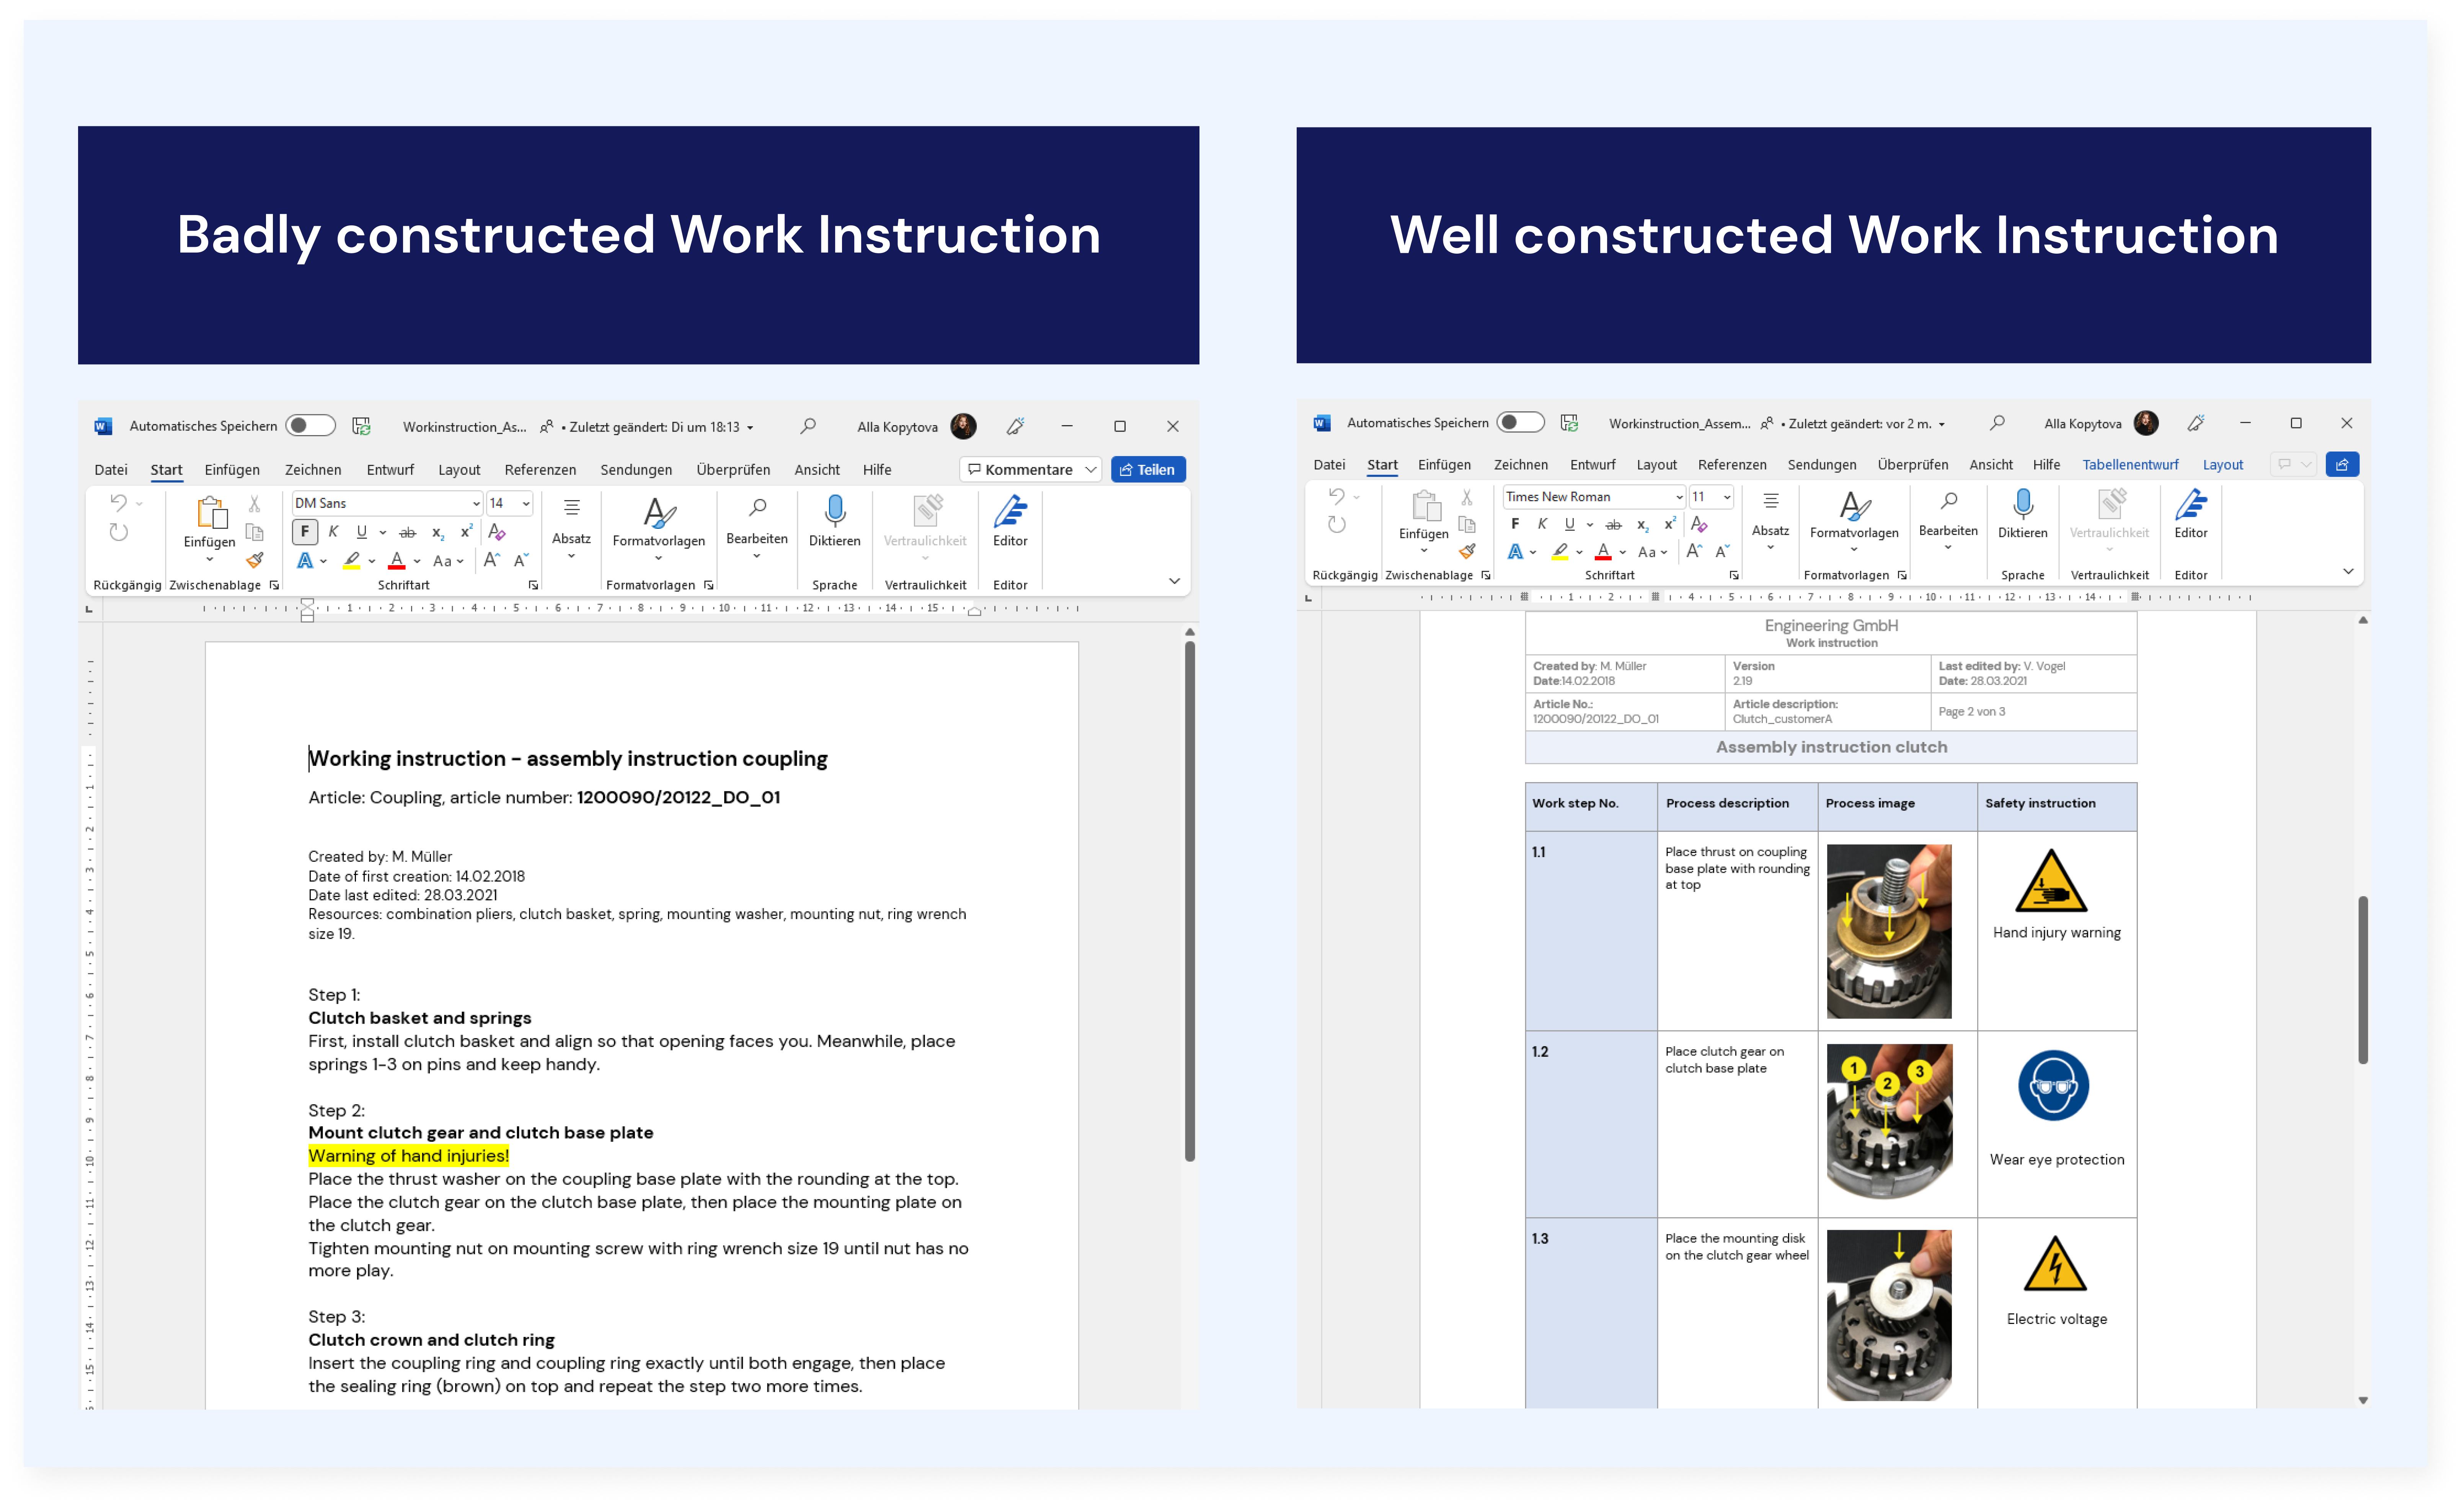 badly and well constructed work instructions comparison